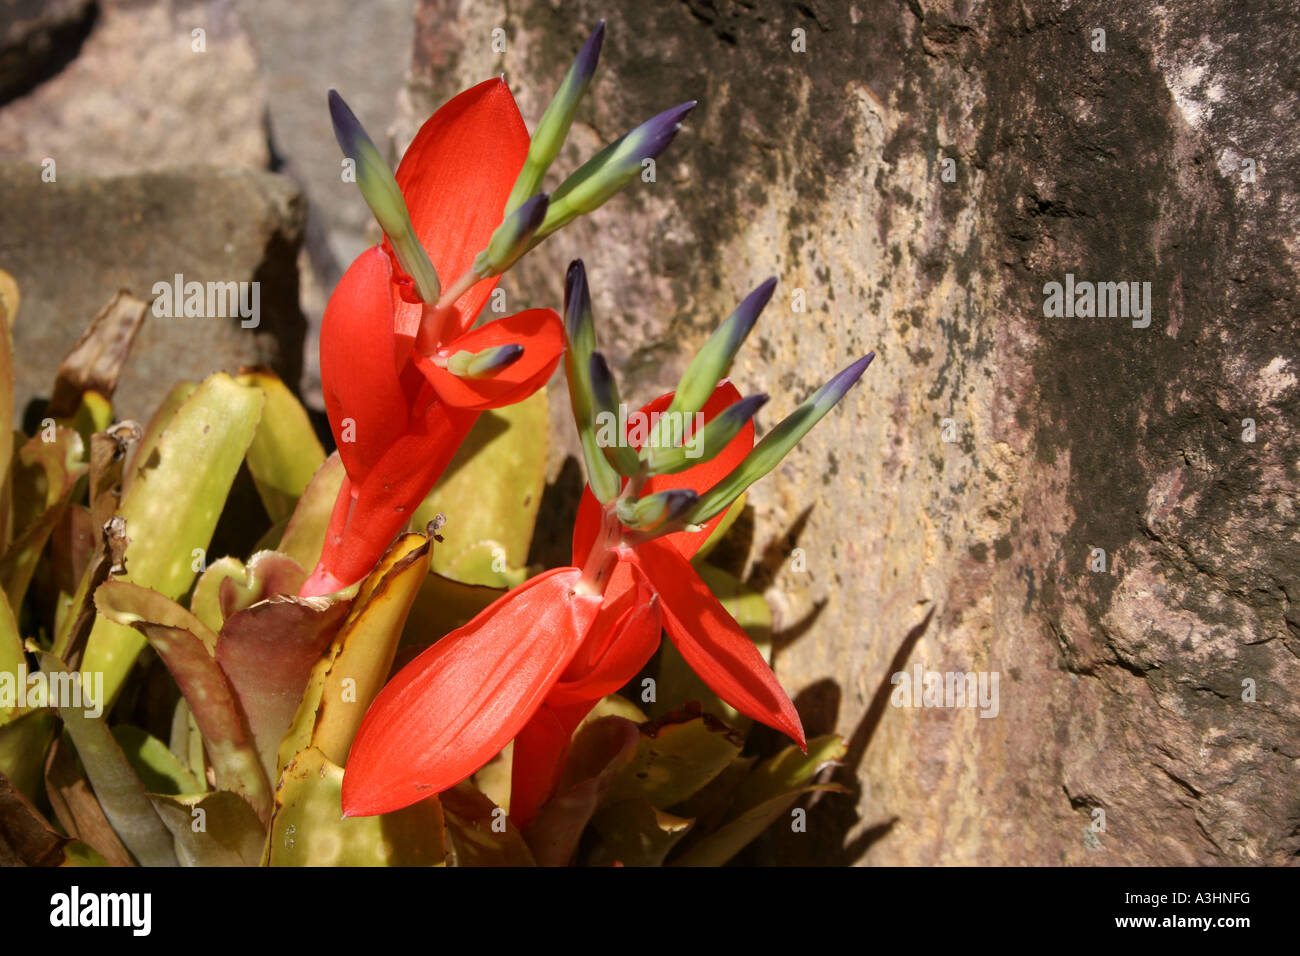 Ade 354 South America,'Queens Tears' Billbergia nutans Stock Photo